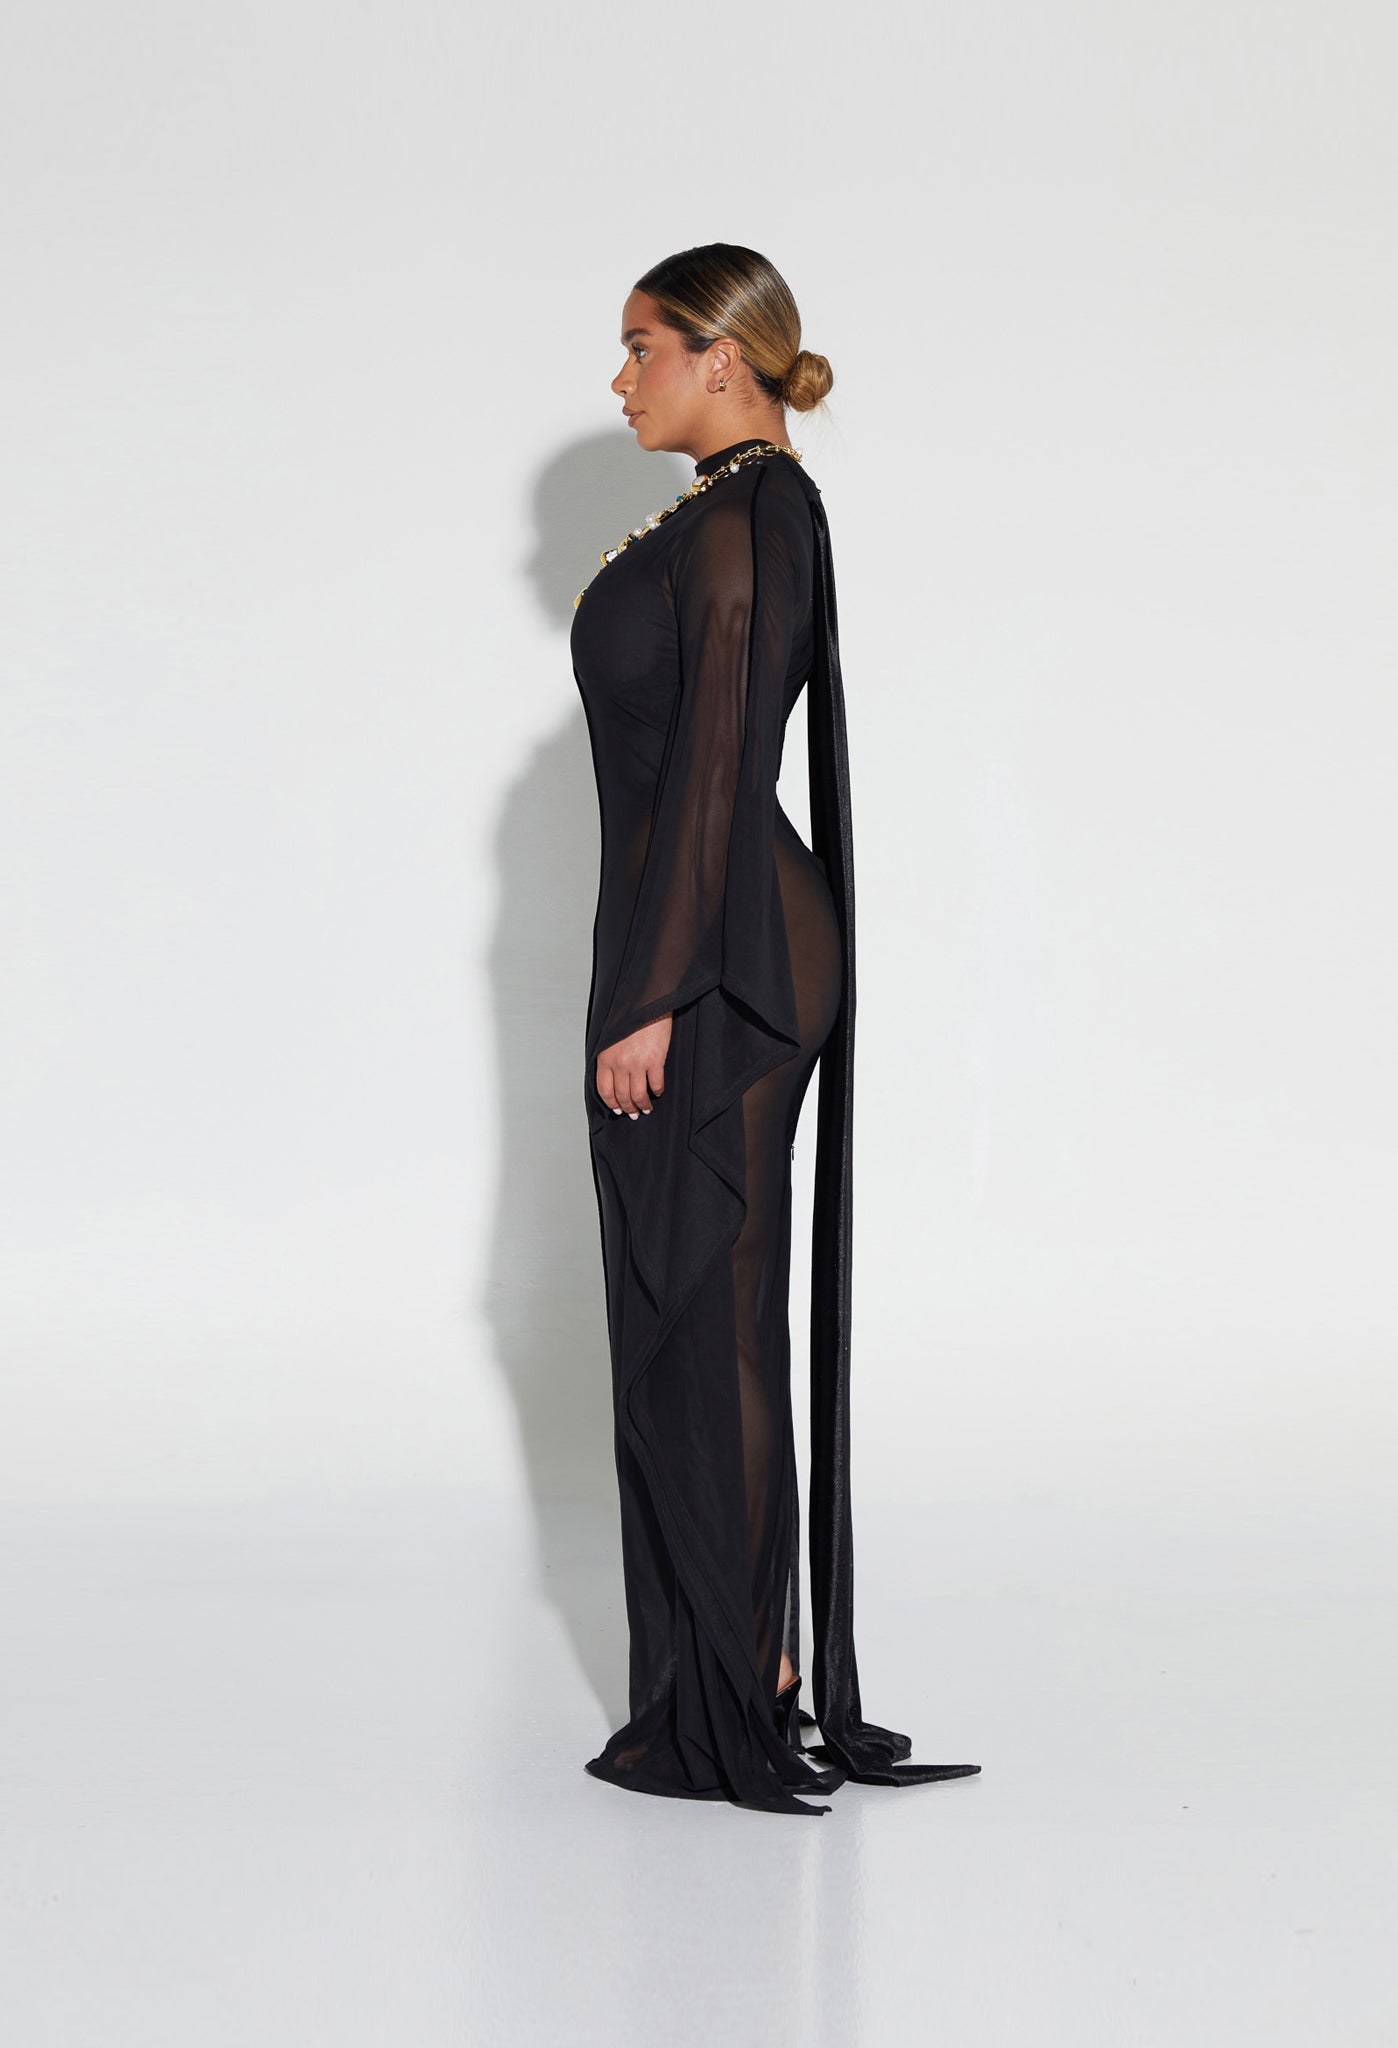 Mesh Batwing Gown - Panther